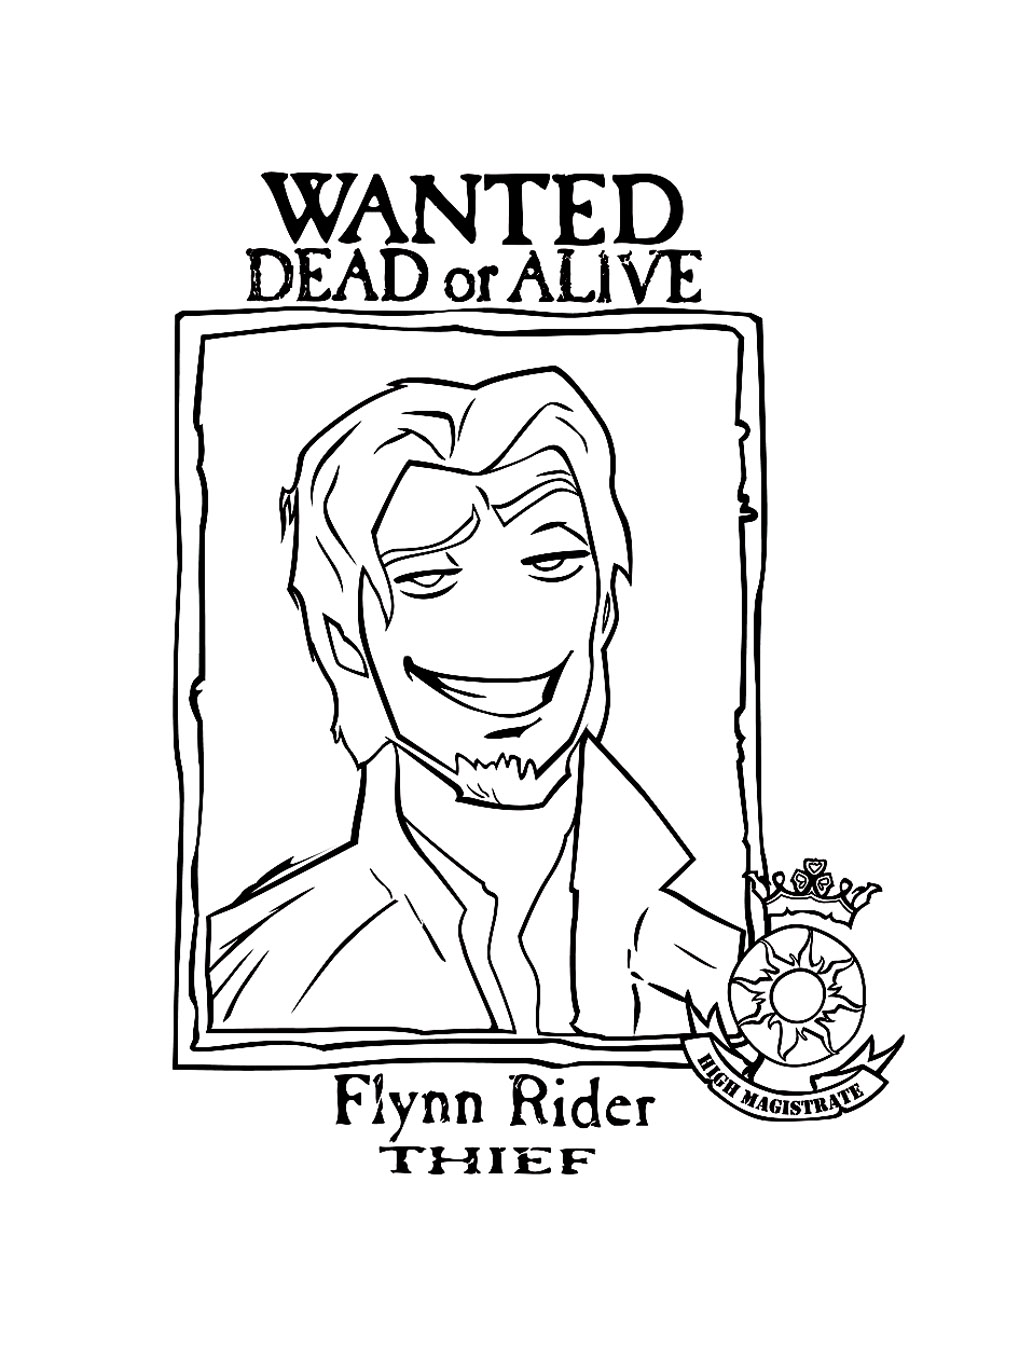 Funny Tangled coloring page for kids : Flynn Rider Wanted Dead or Alive. 